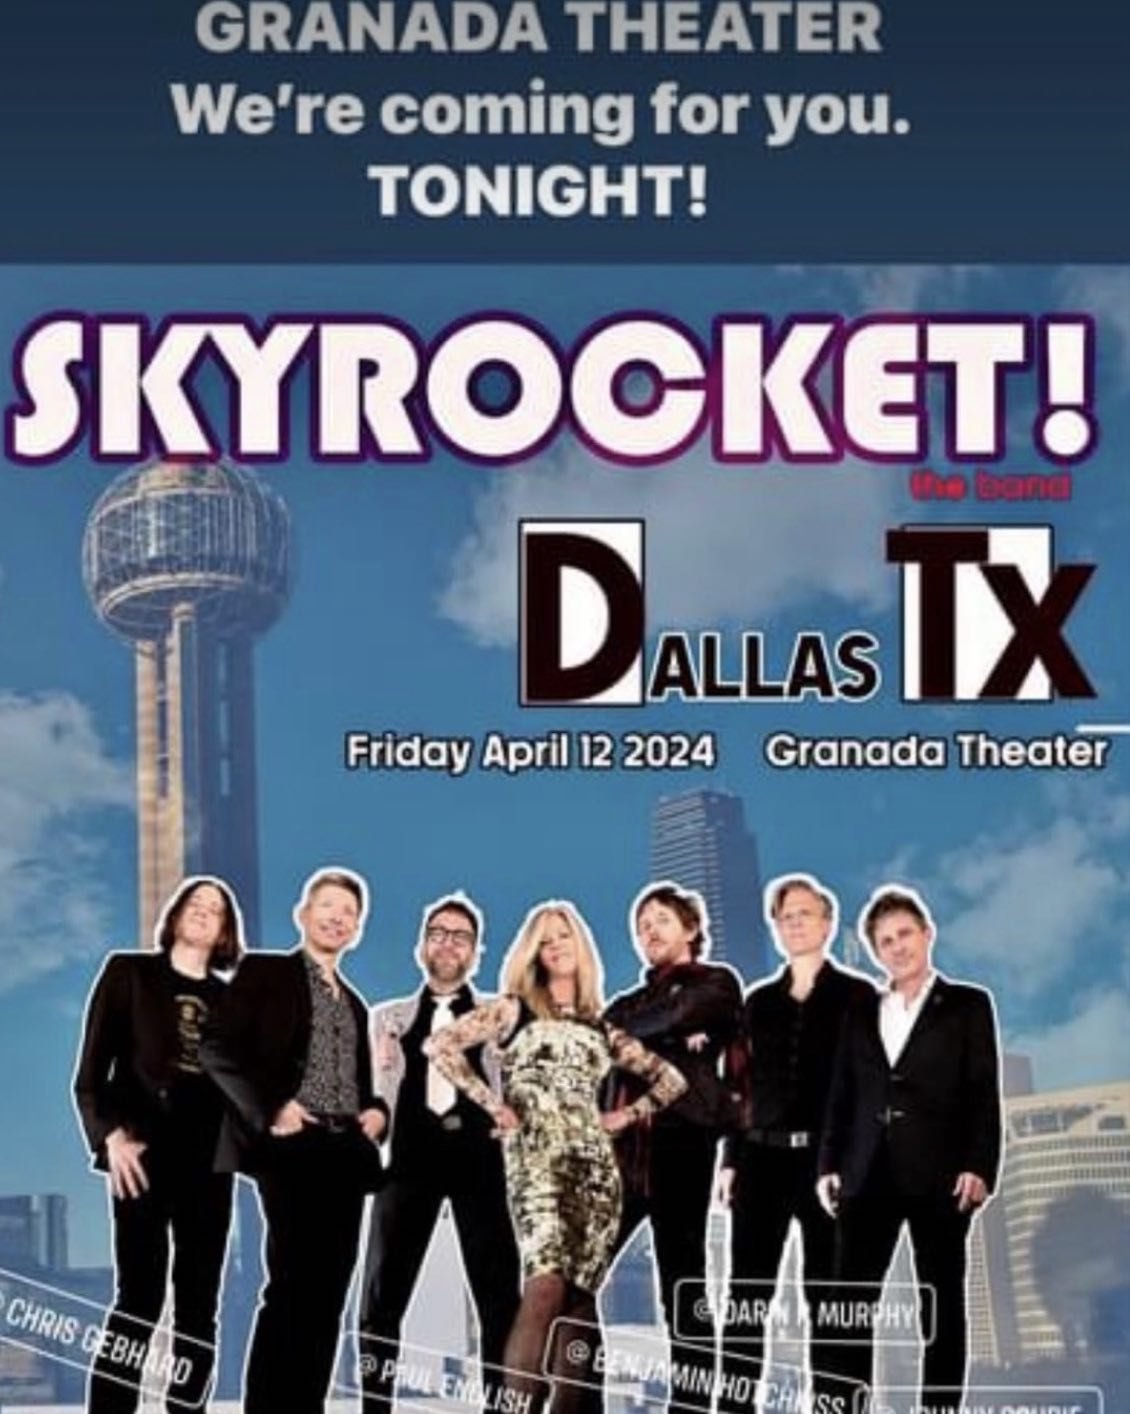 Dallas, it&rsquo;s time for blastoff! Skyrocket at the Granada theater tonight, we start at 8 PM &ndash; &ndash;